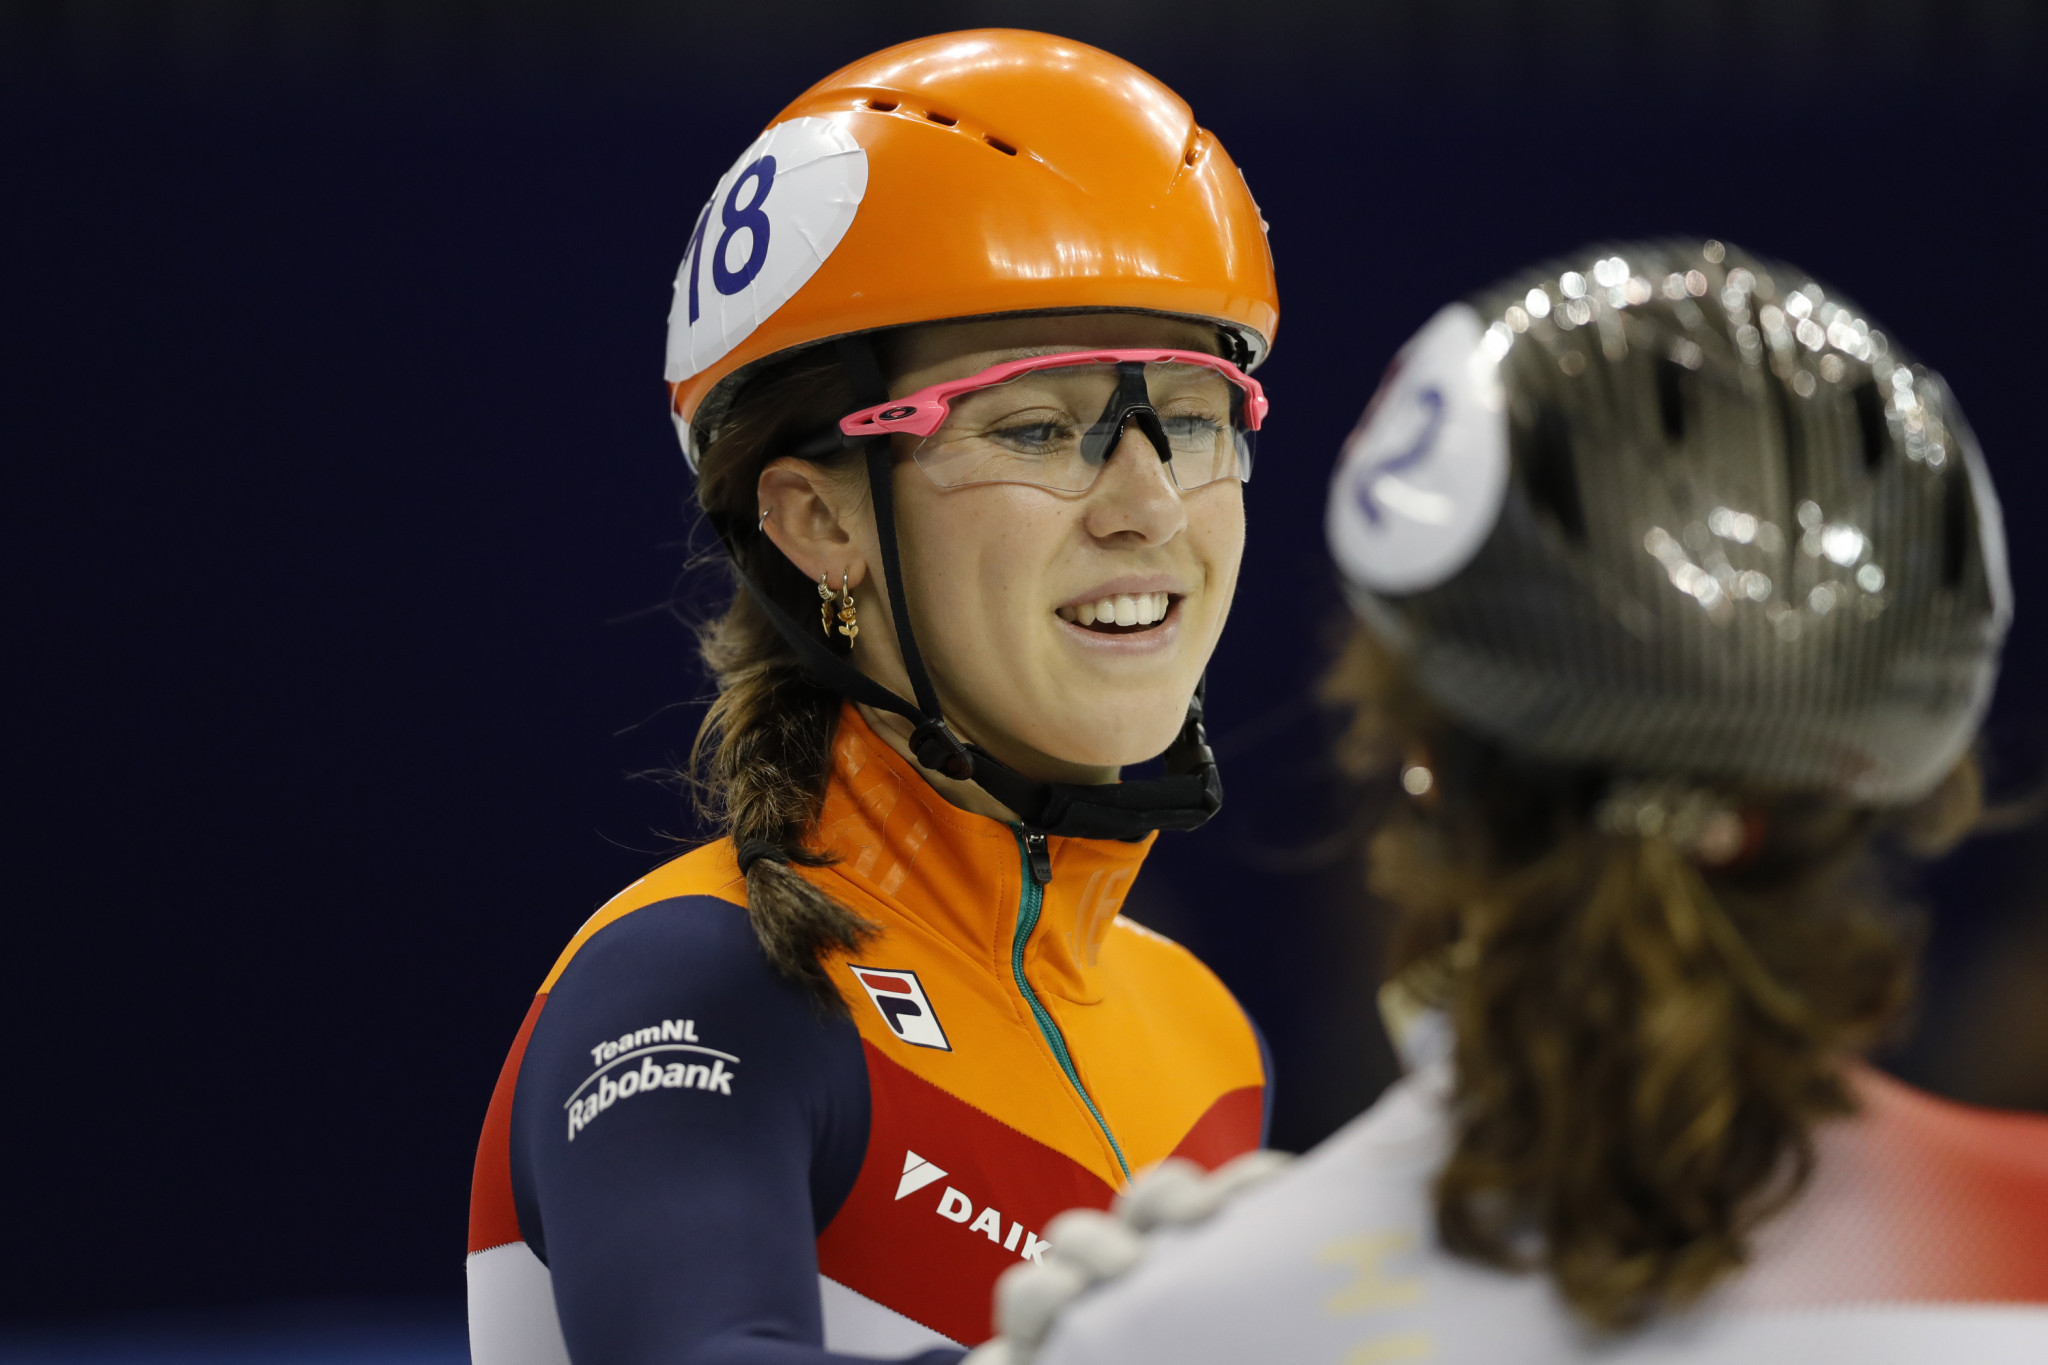 Schulting and Boutin stay on course for ISU World Cup title wins in Dresden